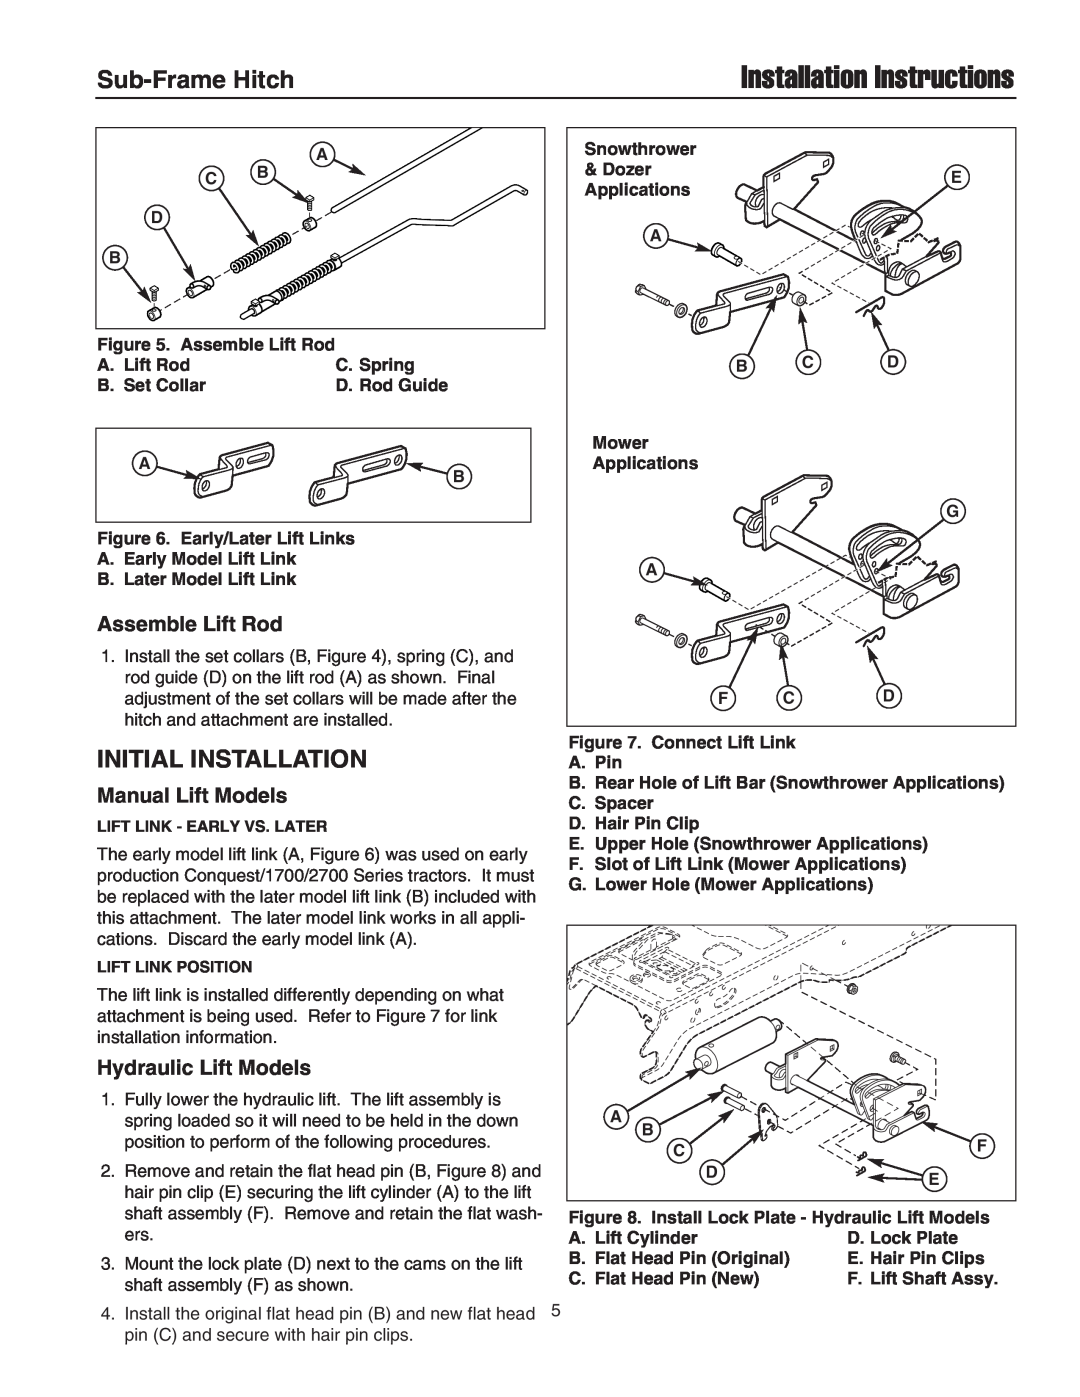 Briggs & Stratton 1695195 Initial Installation, Installation Instructions, Sub-Frame Hitch, Assemble Lift Rod 